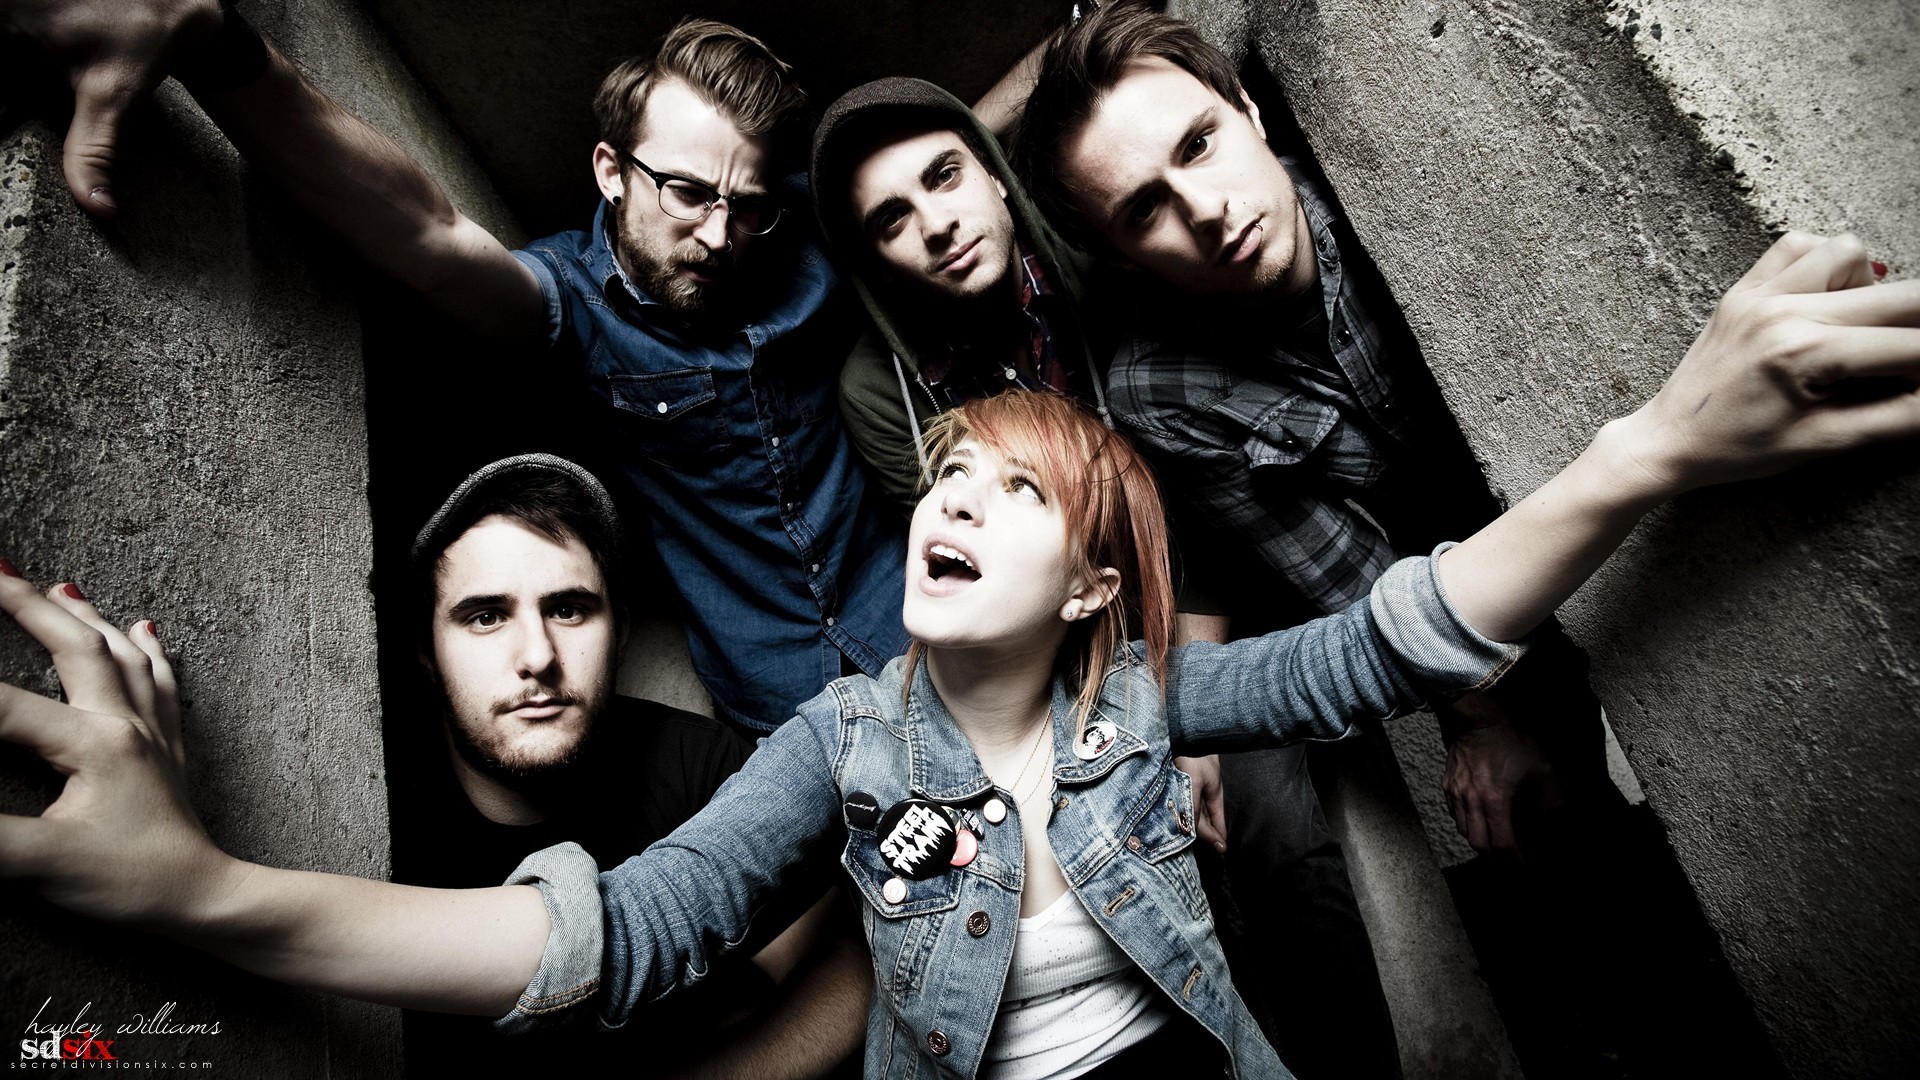 1920x1080 ... Free Download Awesome Paramore - Full HD Background Wallpapers ...